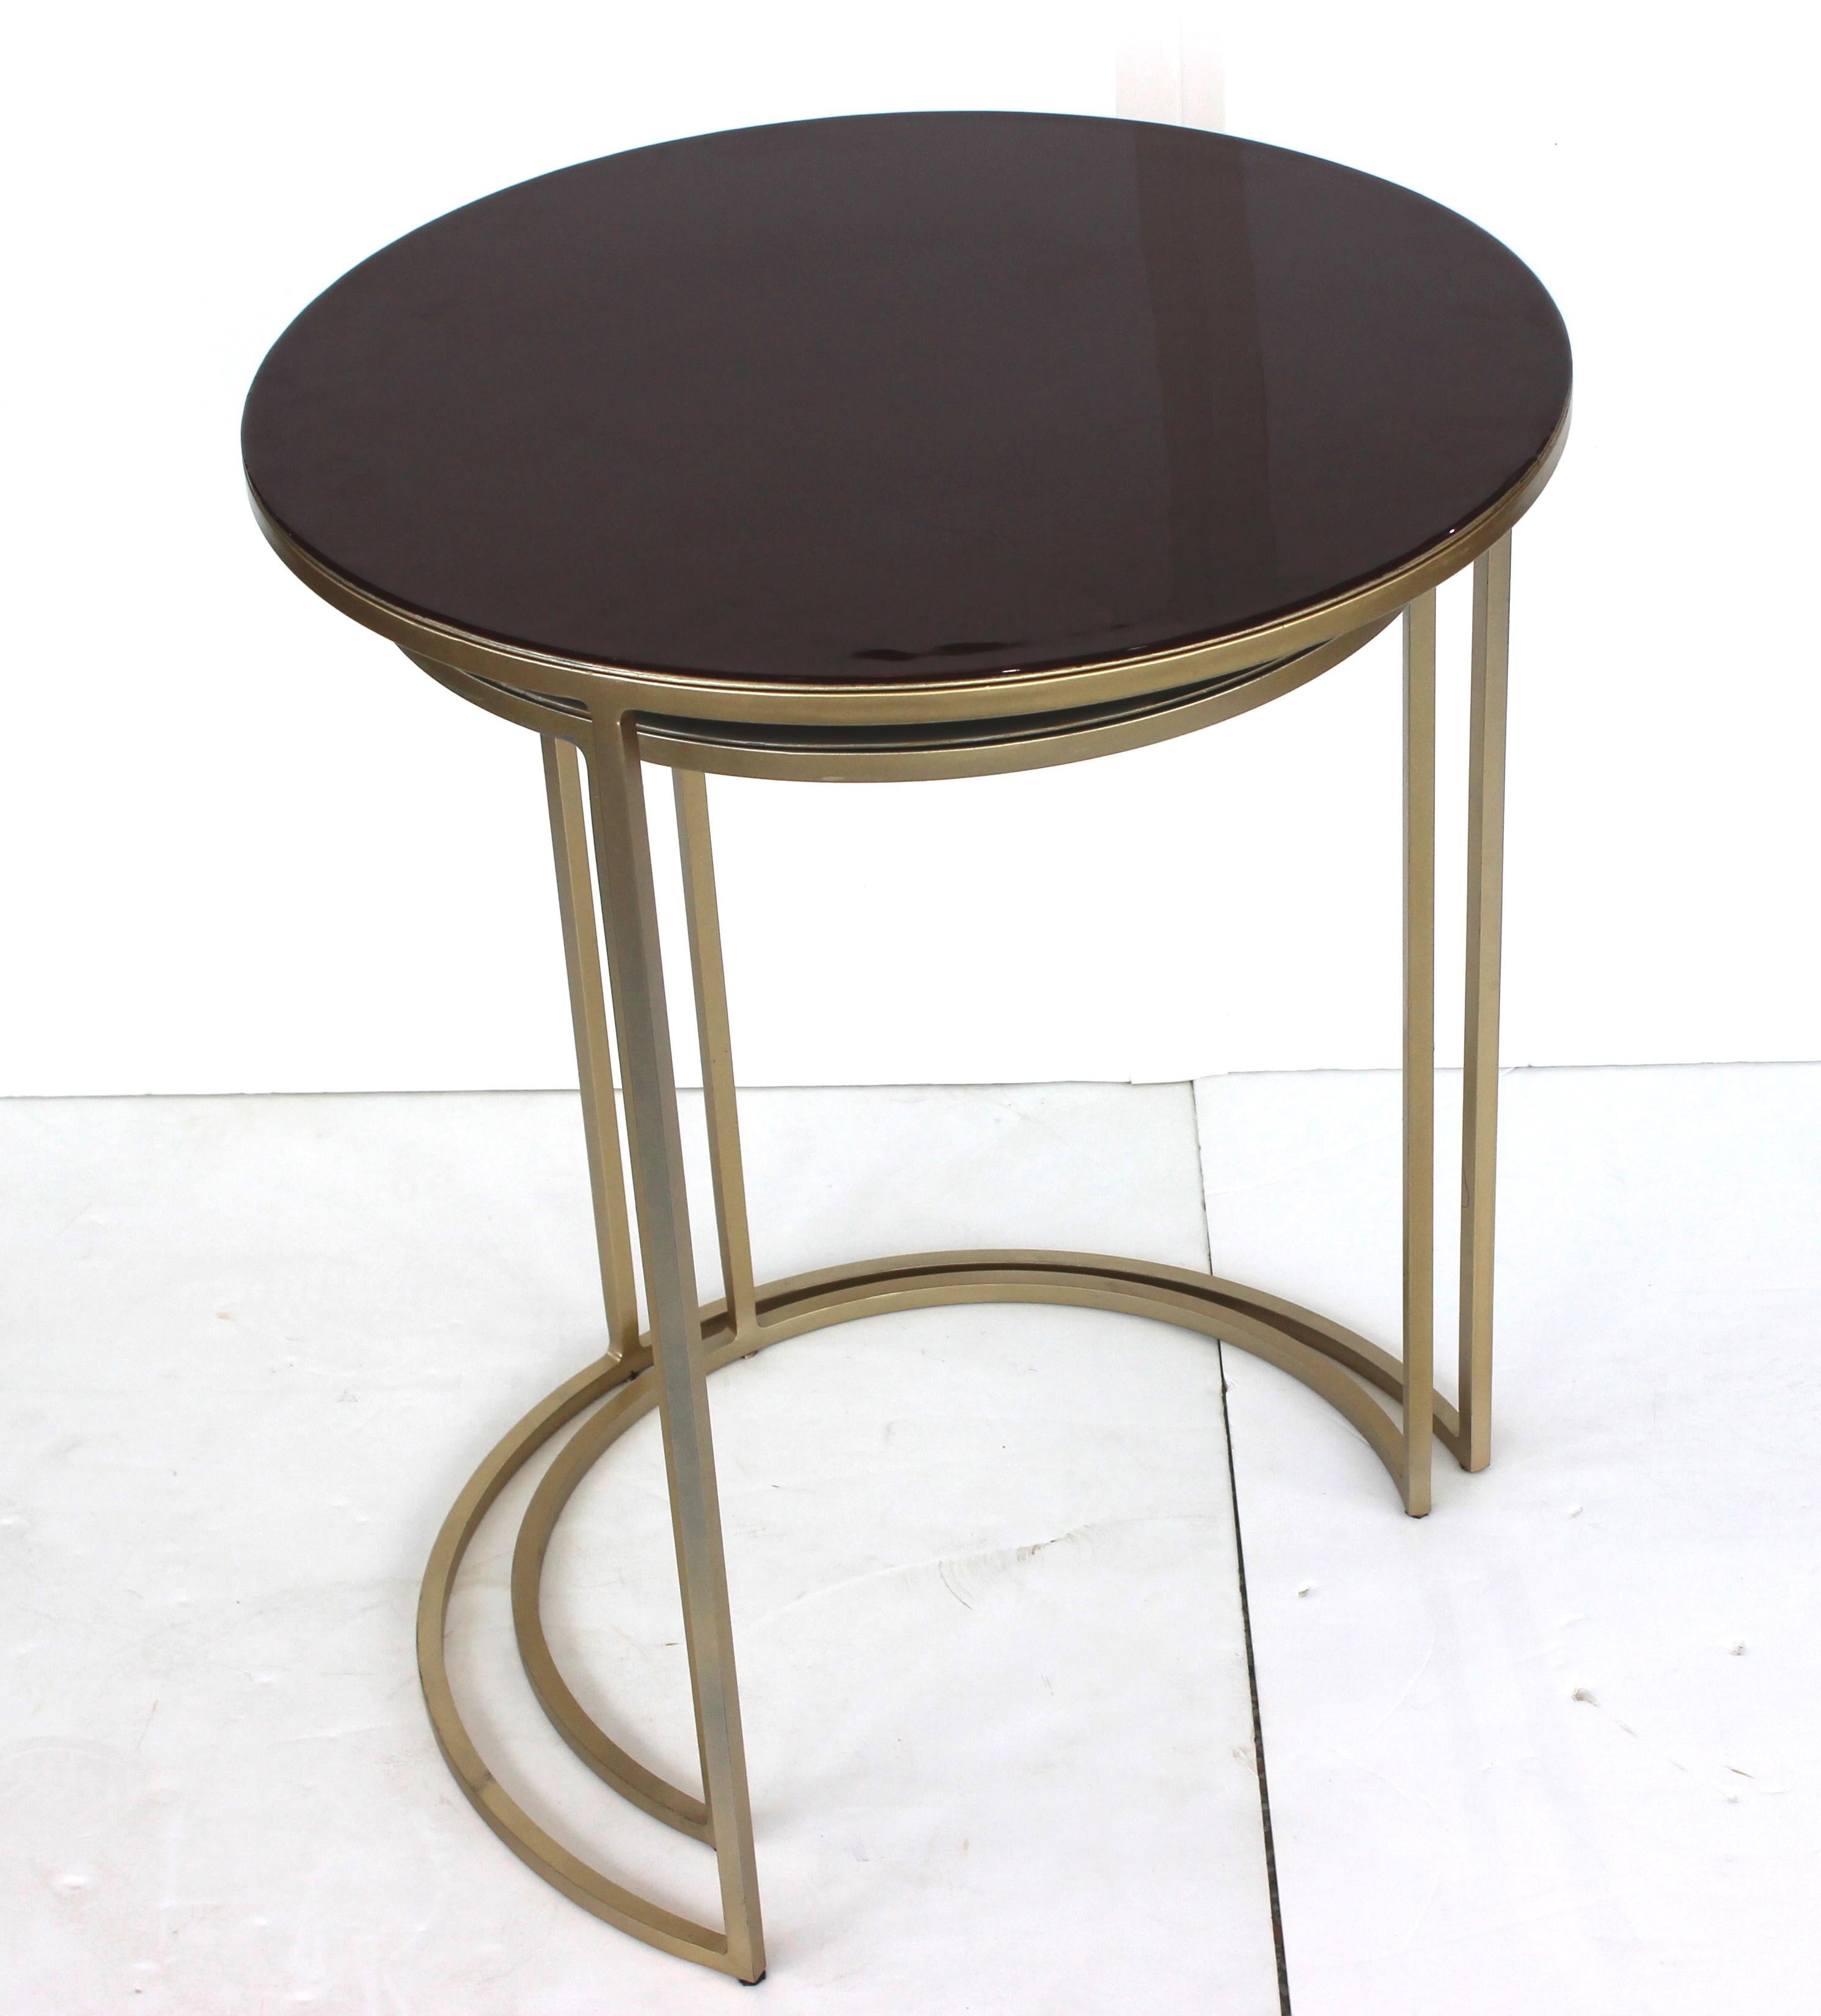 This stylish and chic two-piece nesting tables date the 1990s and are very much in the manner of streamlined pieces created during the Art Deco period.  They both have a gold/bronze toned finish on the frames, and the lacquered tops have a deep